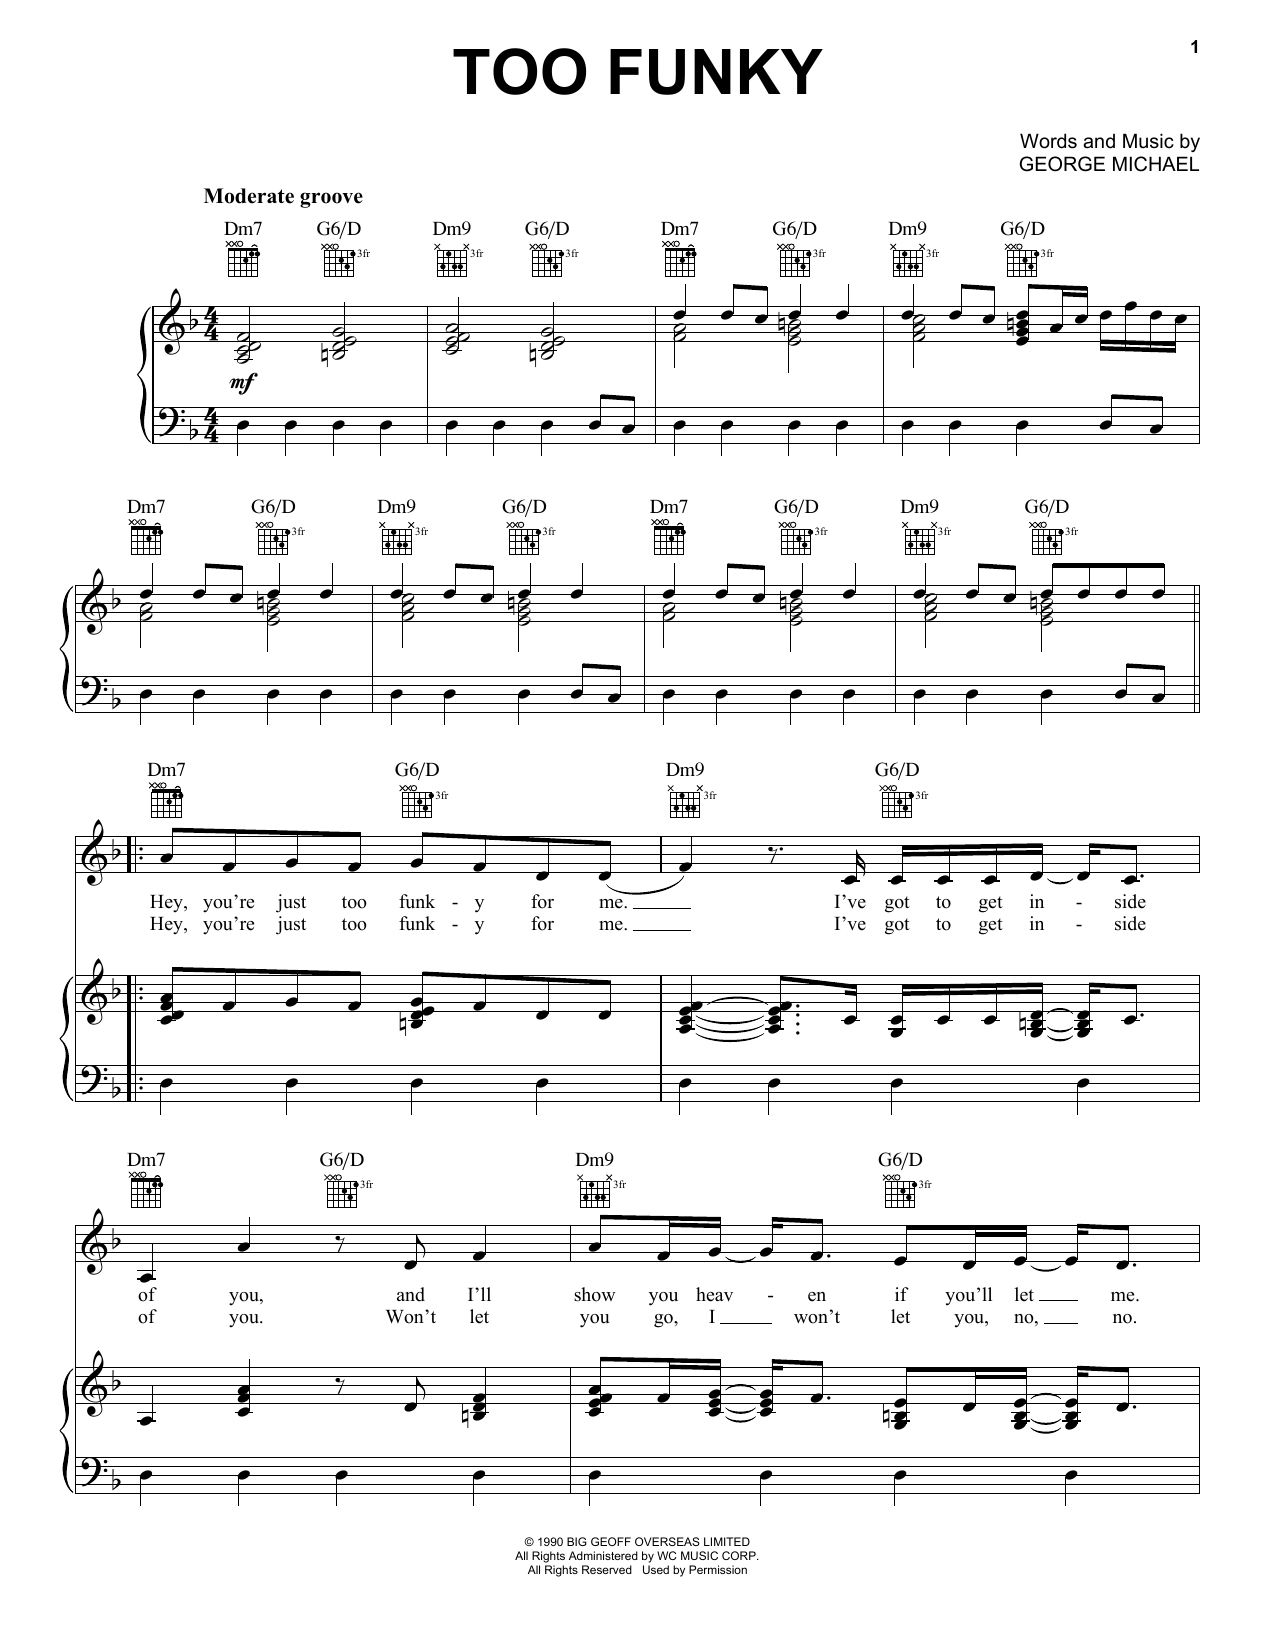 Download George Michael Too Funky Sheet Music